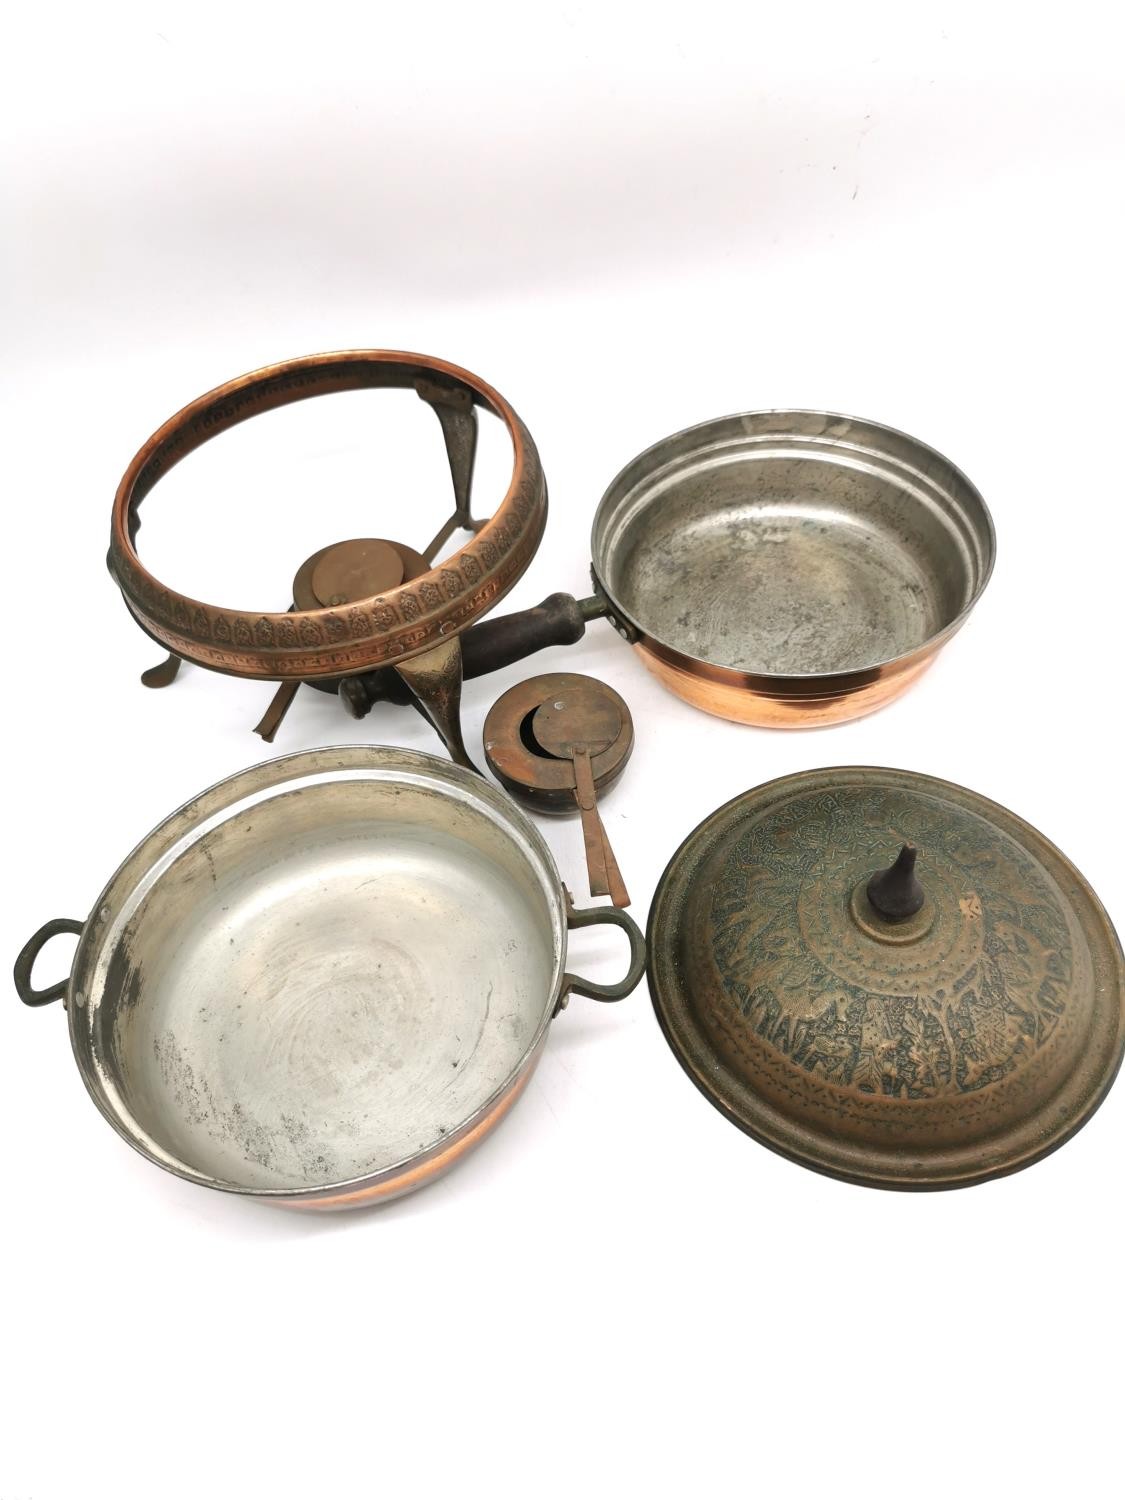 A pair of early 20th century Iranian Nader copper cooking pots with burners with figural design. - Image 6 of 6